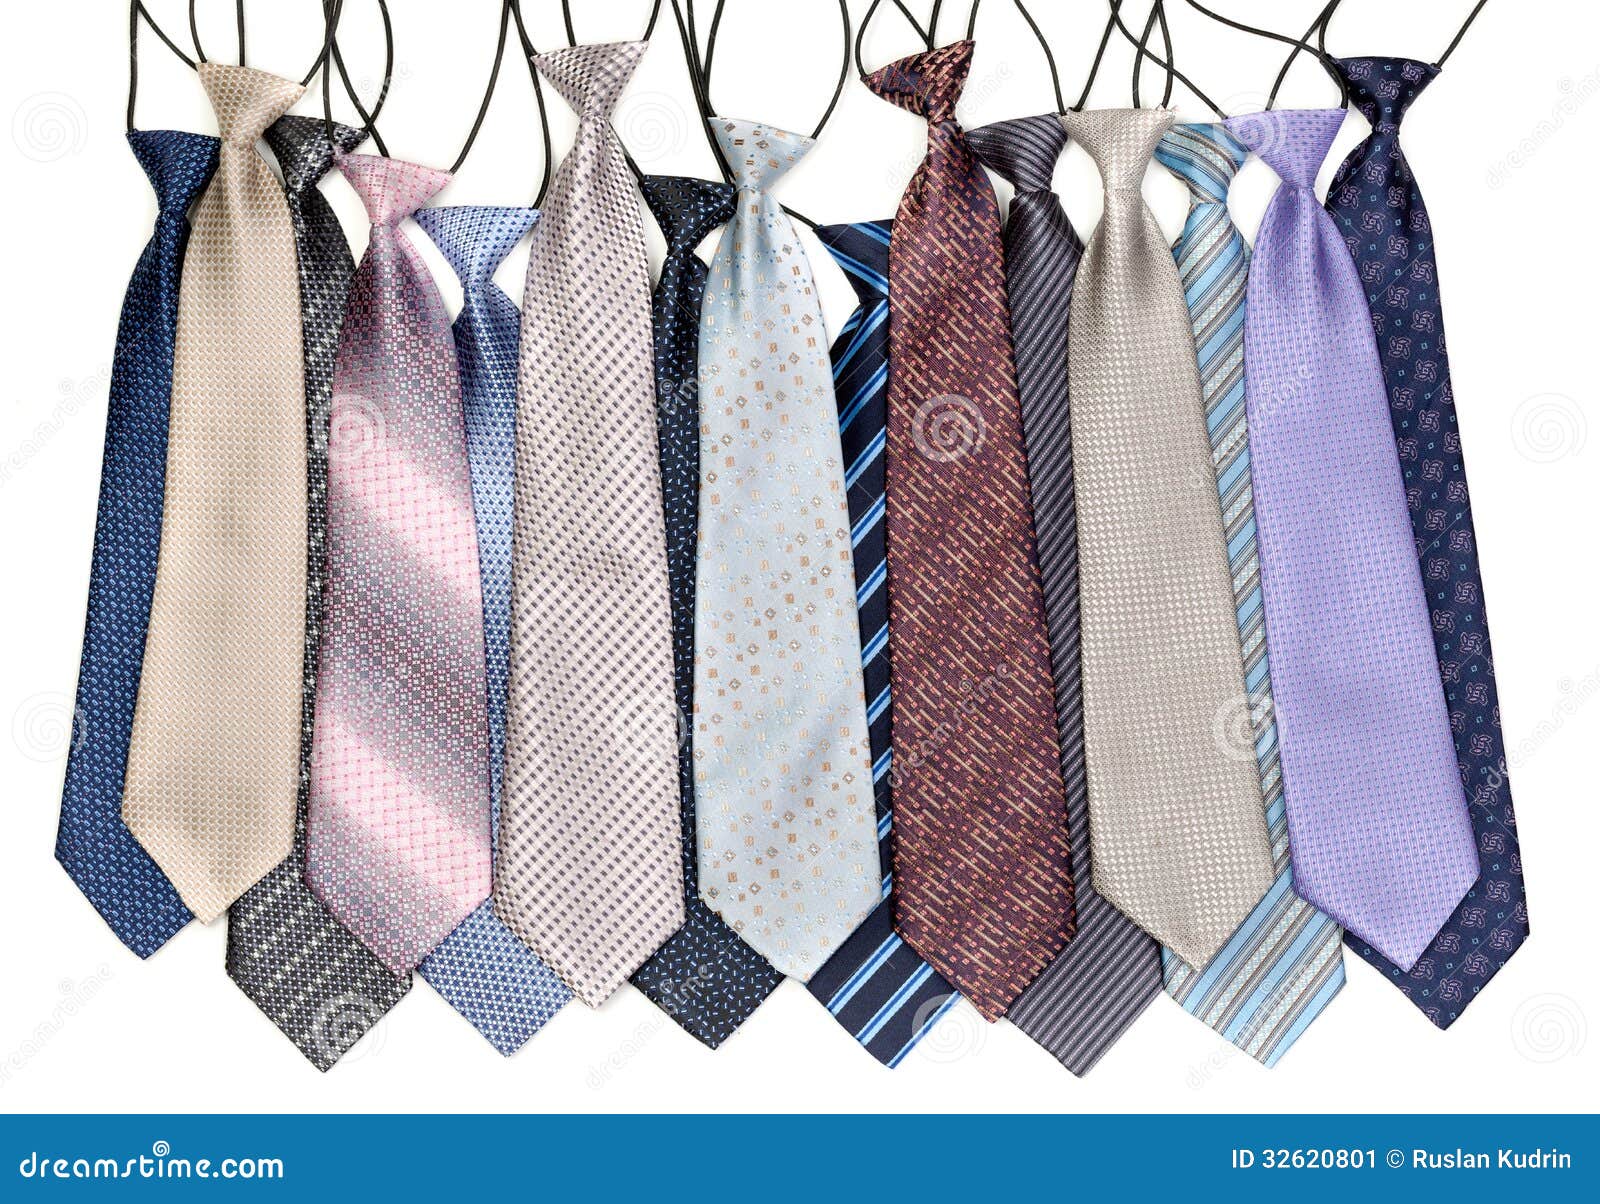 Lots of Tie an Elastic Band Stock Image - Image of professional, front ...